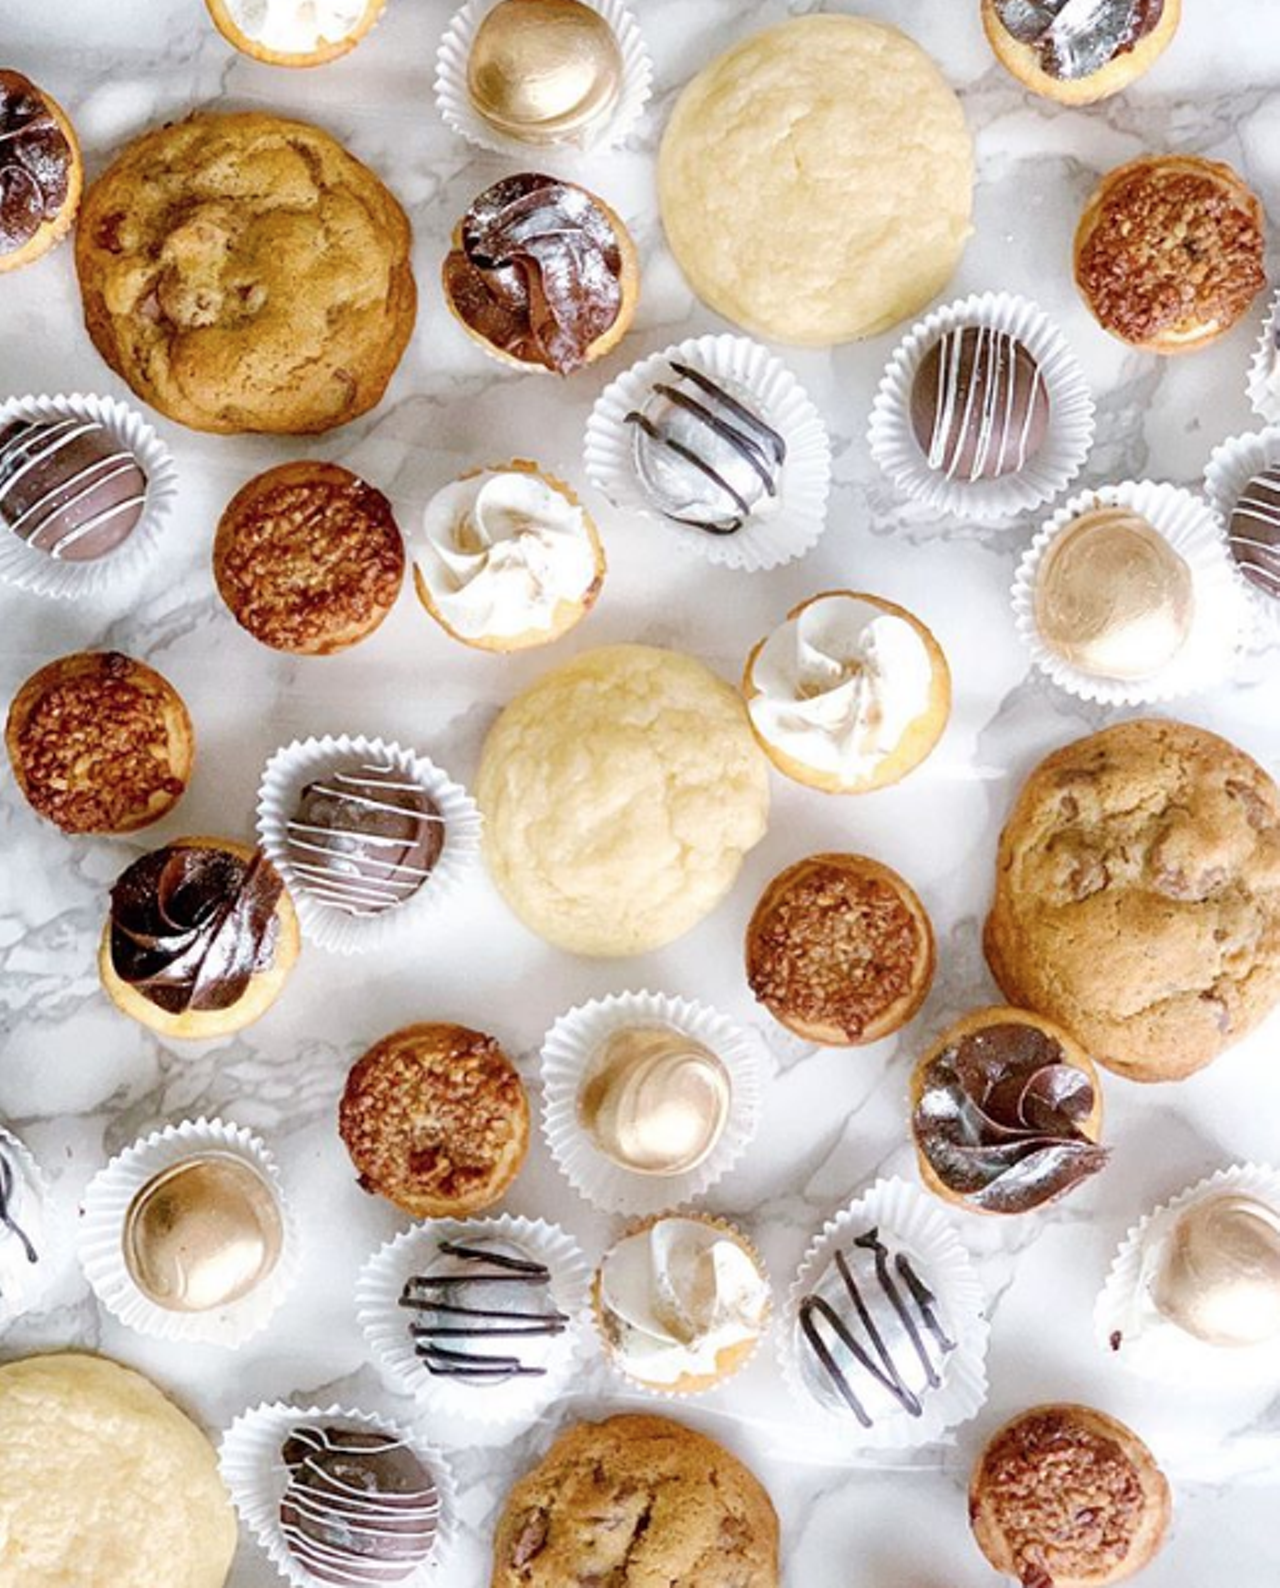 Annie’s Petite Treats
anniespetitetreats.com
With each dessert made with love, owner Annie Vu brings homemade treat so San Antonio – from cakes in all sizes and pies to small treats like cookies and rice crispy treats. Handcrafted treats have never tasted so good.
Photo via Instagram / anniespetitetreats